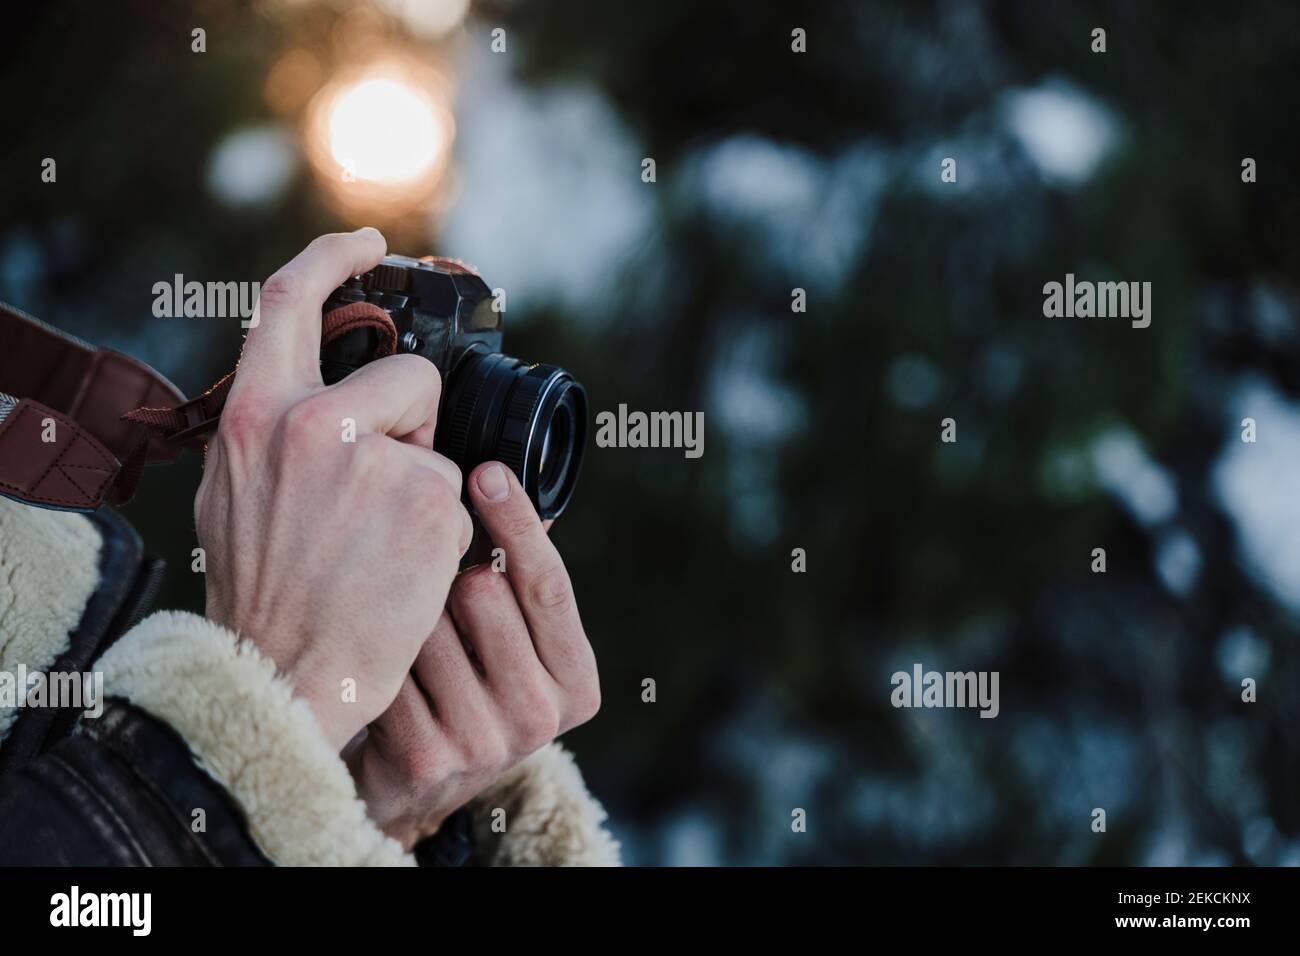 Man taking pictures with camera during winter Stock Photo